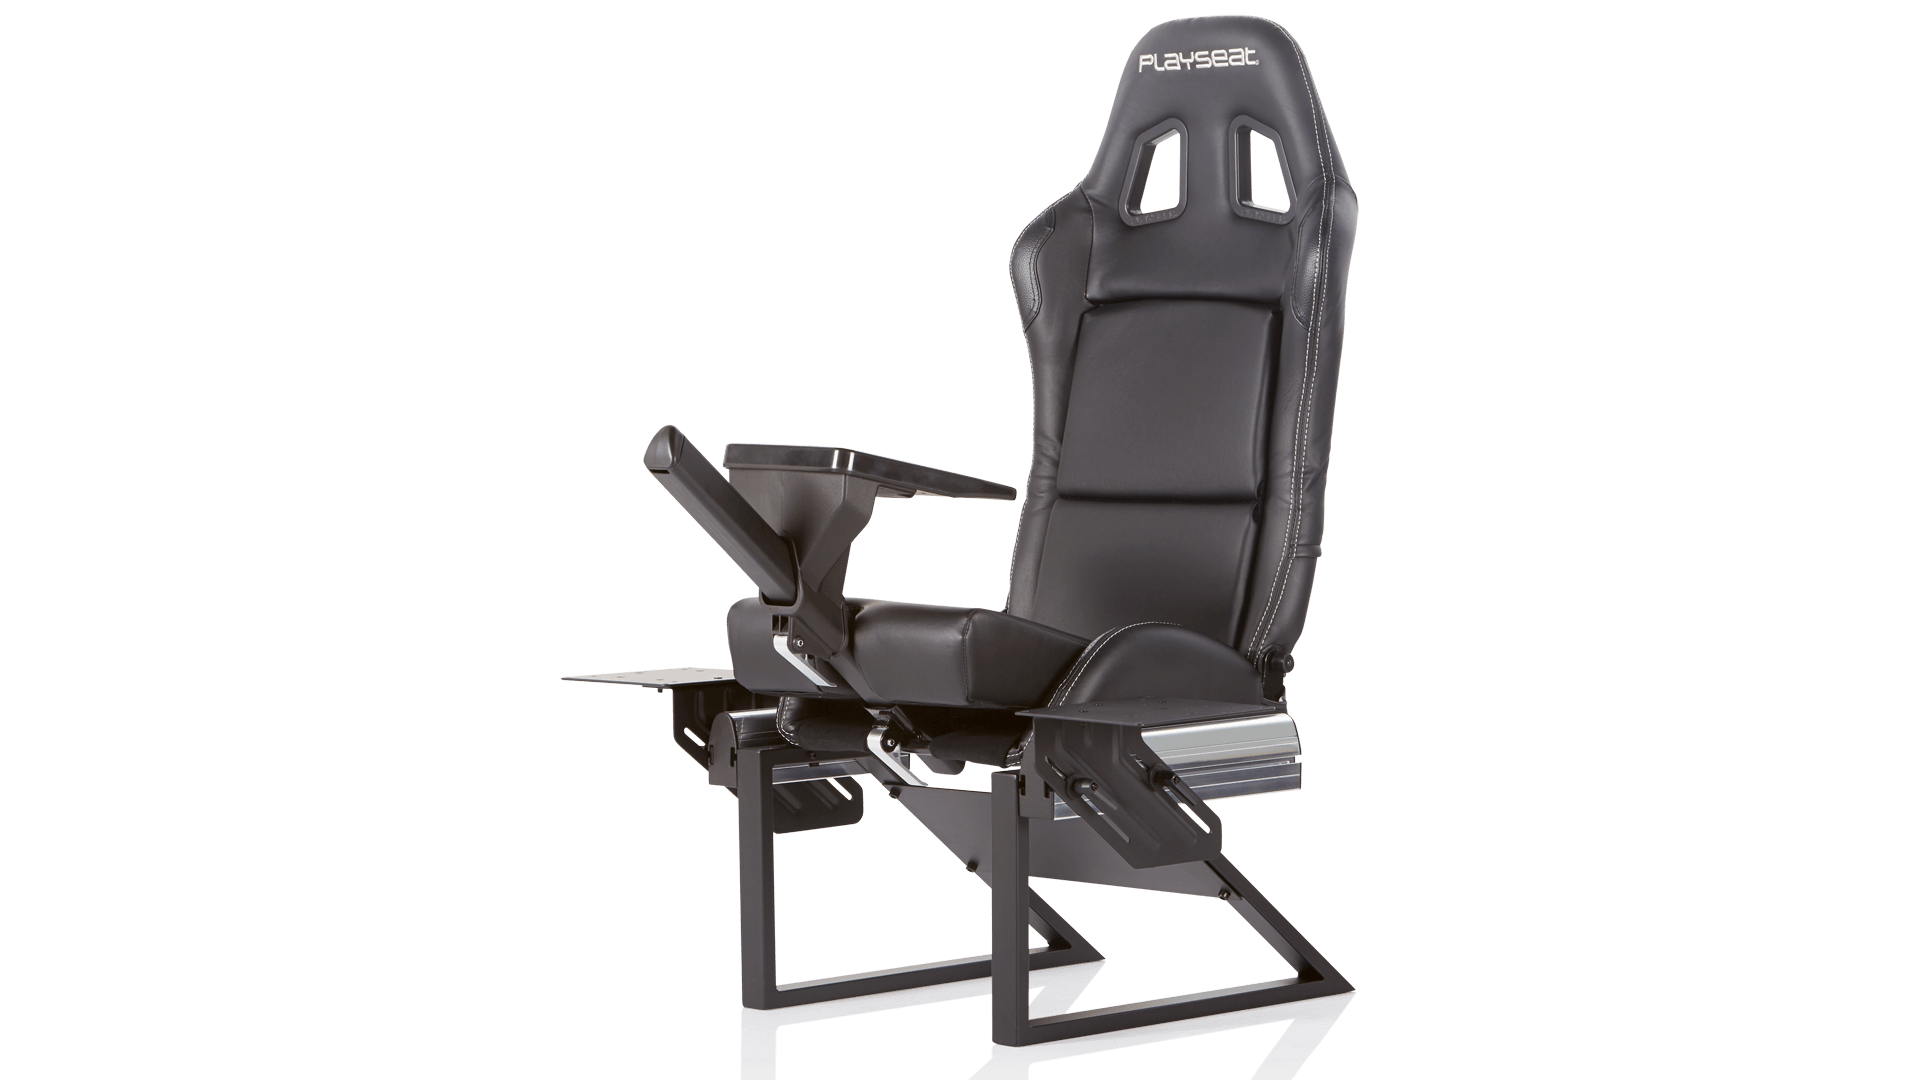 Playseat-Airforce-front-3.png